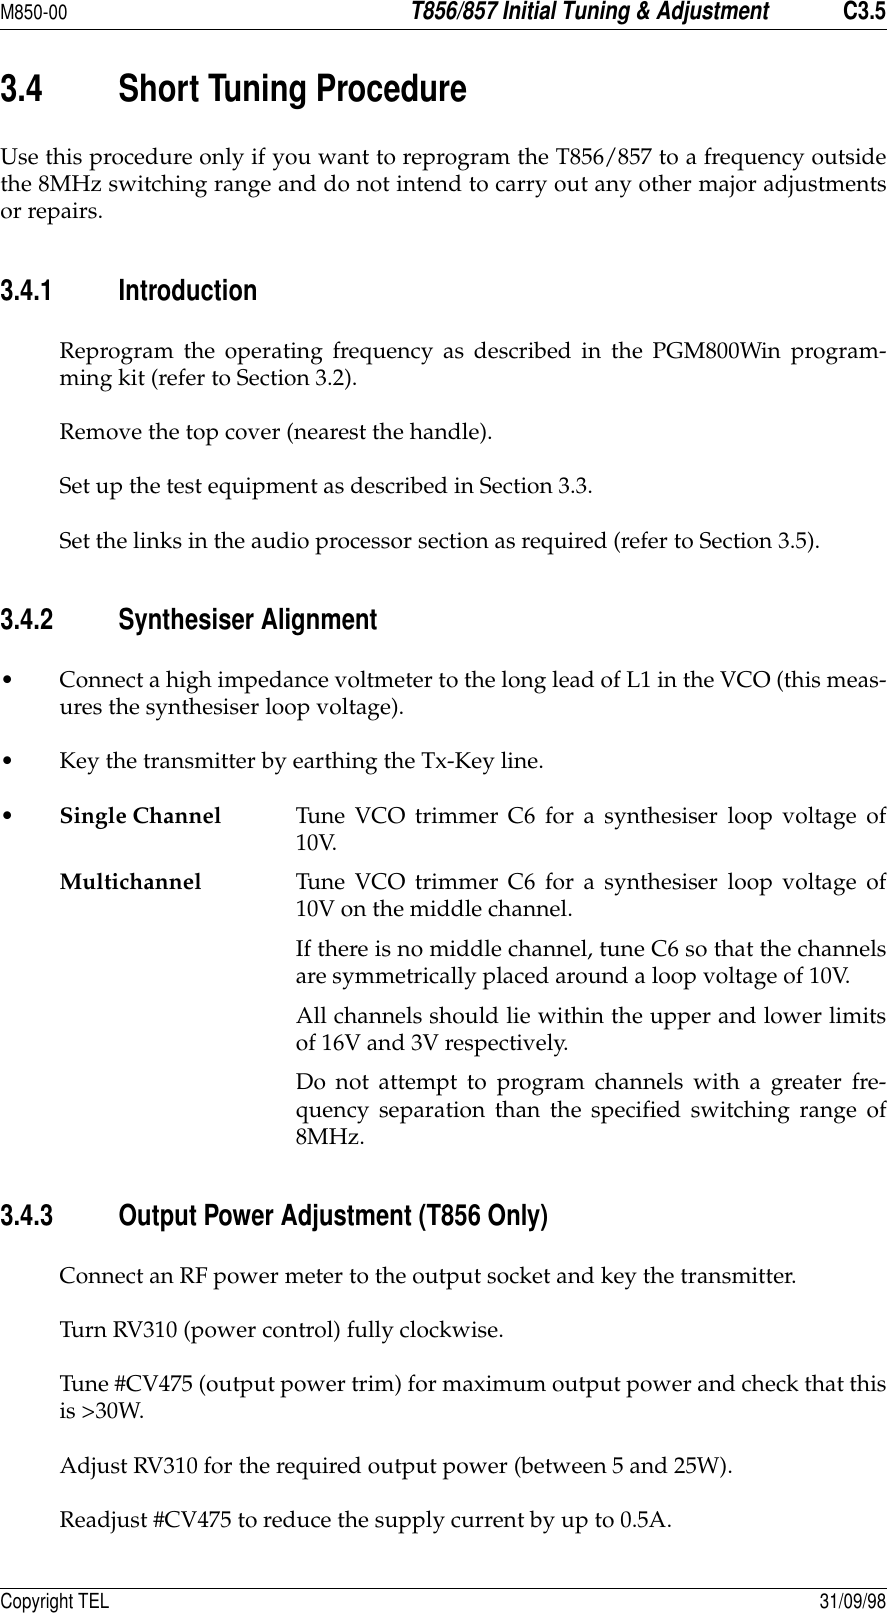 M850-00T856/857 Initial Tuning &amp; AdjustmentC3.5Copyright TEL 31/09/983.4 Short Tuning ProcedureUse this procedure only if you want to reprogram the T856/857 to a frequency outsidethe 8MHz switching range and do not intend to carry out any other major adjustmentsor repairs.3.4.1 IntroductionReprogram the operating frequency as described in the PGM800Win program-ming kit (refer to Section 3.2).Remove the top cover (nearest the handle).Set up the test equipment as described in Section 3.3.Set the links in the audio processor section as required (refer to Section 3.5).3.4.2 Synthesiser Alignment• Connect a high impedance voltmeter to the long lead of L1 in the VCO (this meas-ures the synthesiser loop voltage).• Key the transmitter by earthing the Tx-Key line.•Single Channel Tune VCO trimmer C6 for a synthesiser loop voltage of10V.Multichannel Tune VCO trimmer C6 for a synthesiser loop voltage of10V on the middle channel.If there is no middle channel, tune C6 so that the channelsare symmetrically placed around a loop voltage of 10V.All channels should lie within the upper and lower limitsof 16V and 3V respectively.Do not attempt to program channels with a greater fre-quency separation than the specified switching range of8MHz.3.4.3 Output Power Adjustment (T856 Only)Connect an RF power meter to the output socket and key the transmitter.Turn RV310 (power control) fully clockwise.Tune #CV475 (output power trim) for maximum output power and check that thisis &gt;30W.Adjust RV310 for the required output power (between 5 and 25W).Readjust #CV475 to reduce the supply current by up to 0.5A.